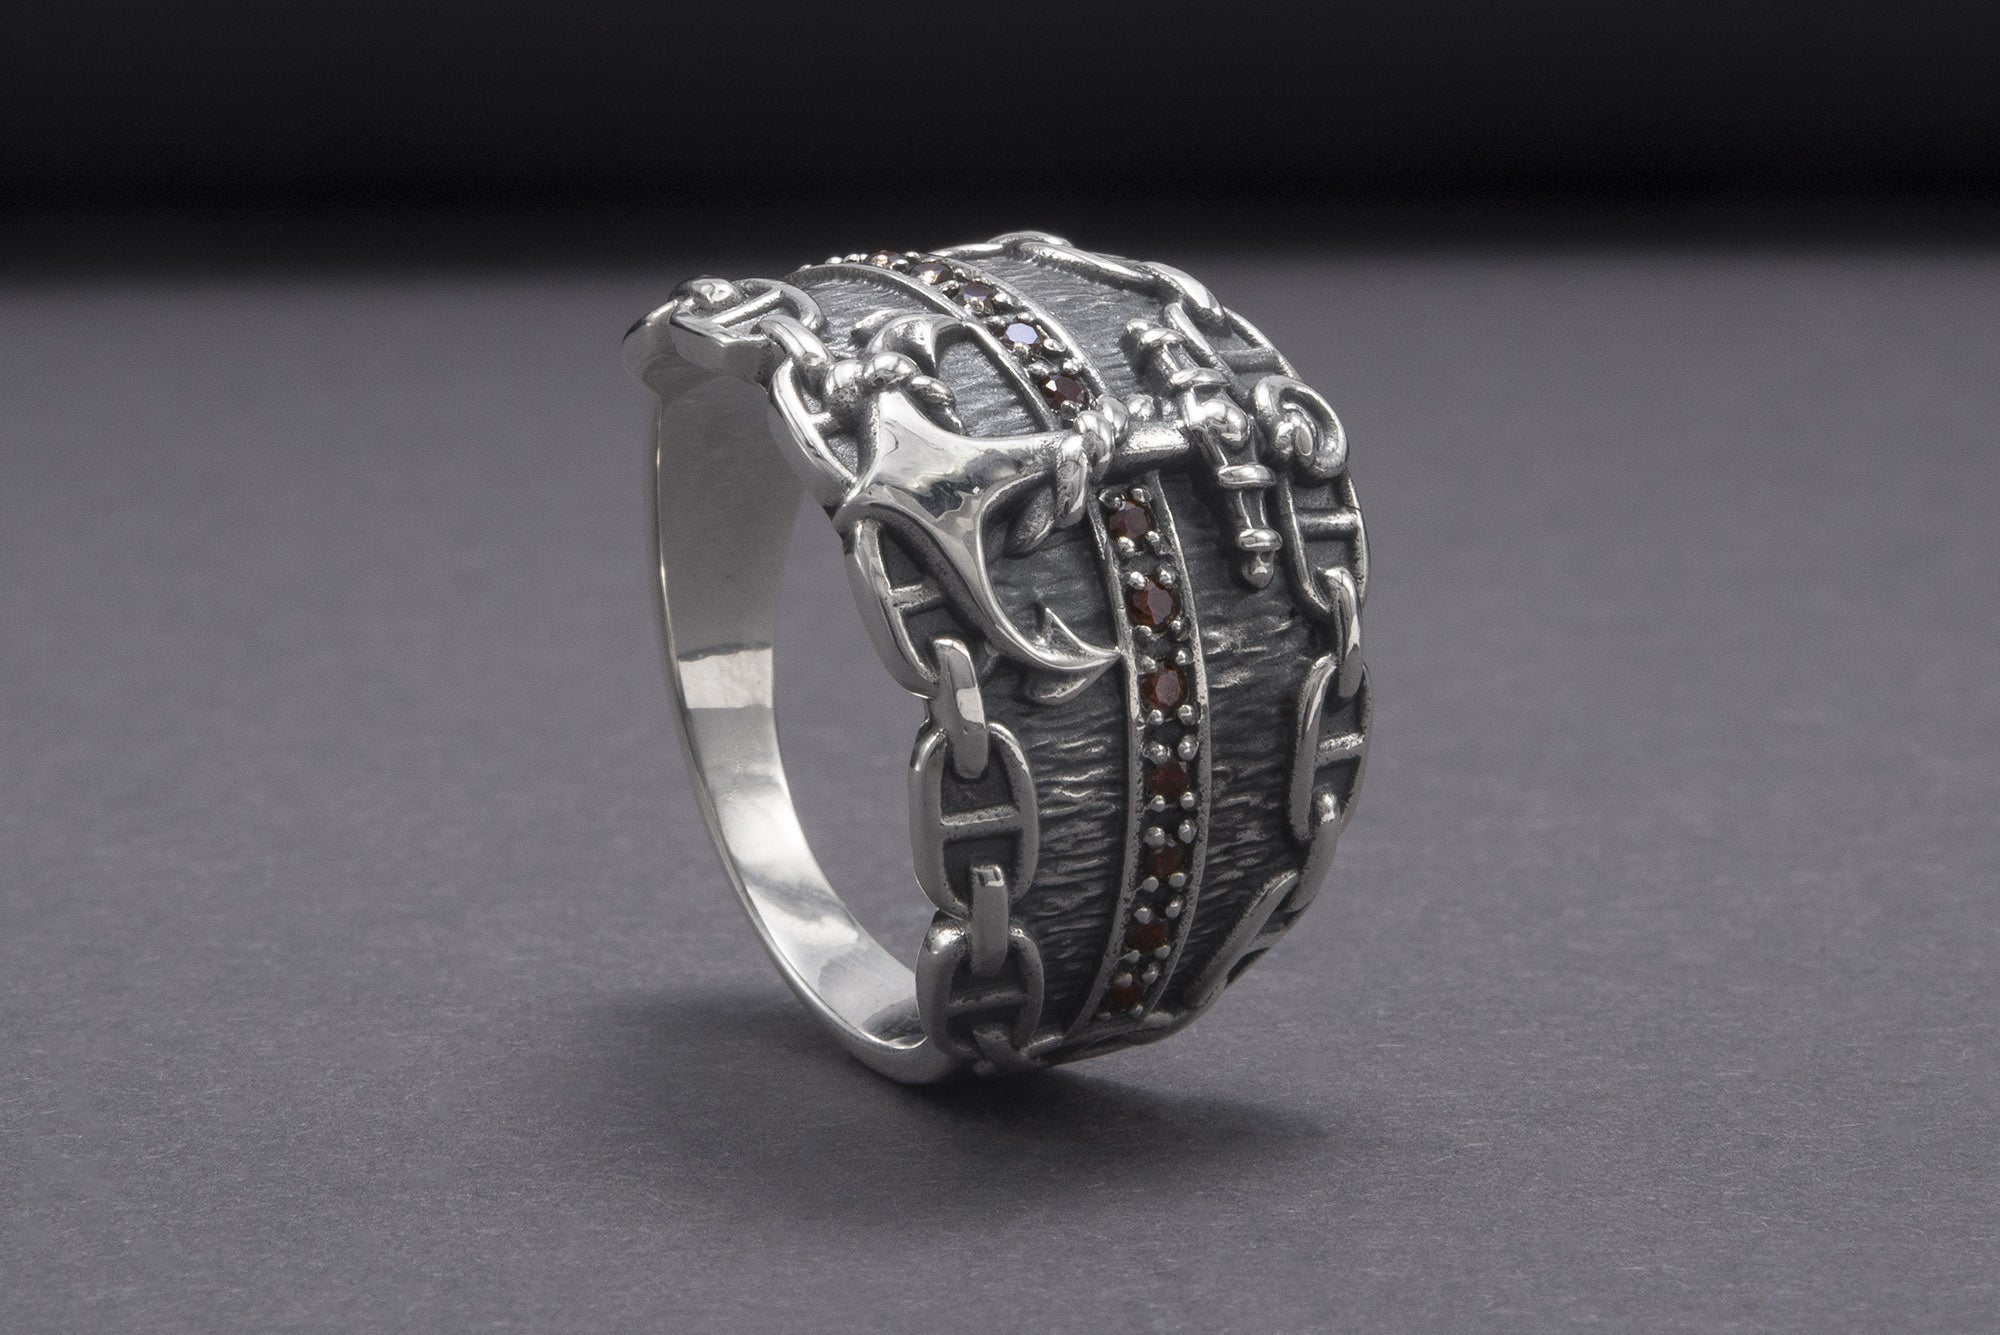 Anchor And Chain 925 Silver Ring With Wood Texture And Gems, Handcrafted Jewelry